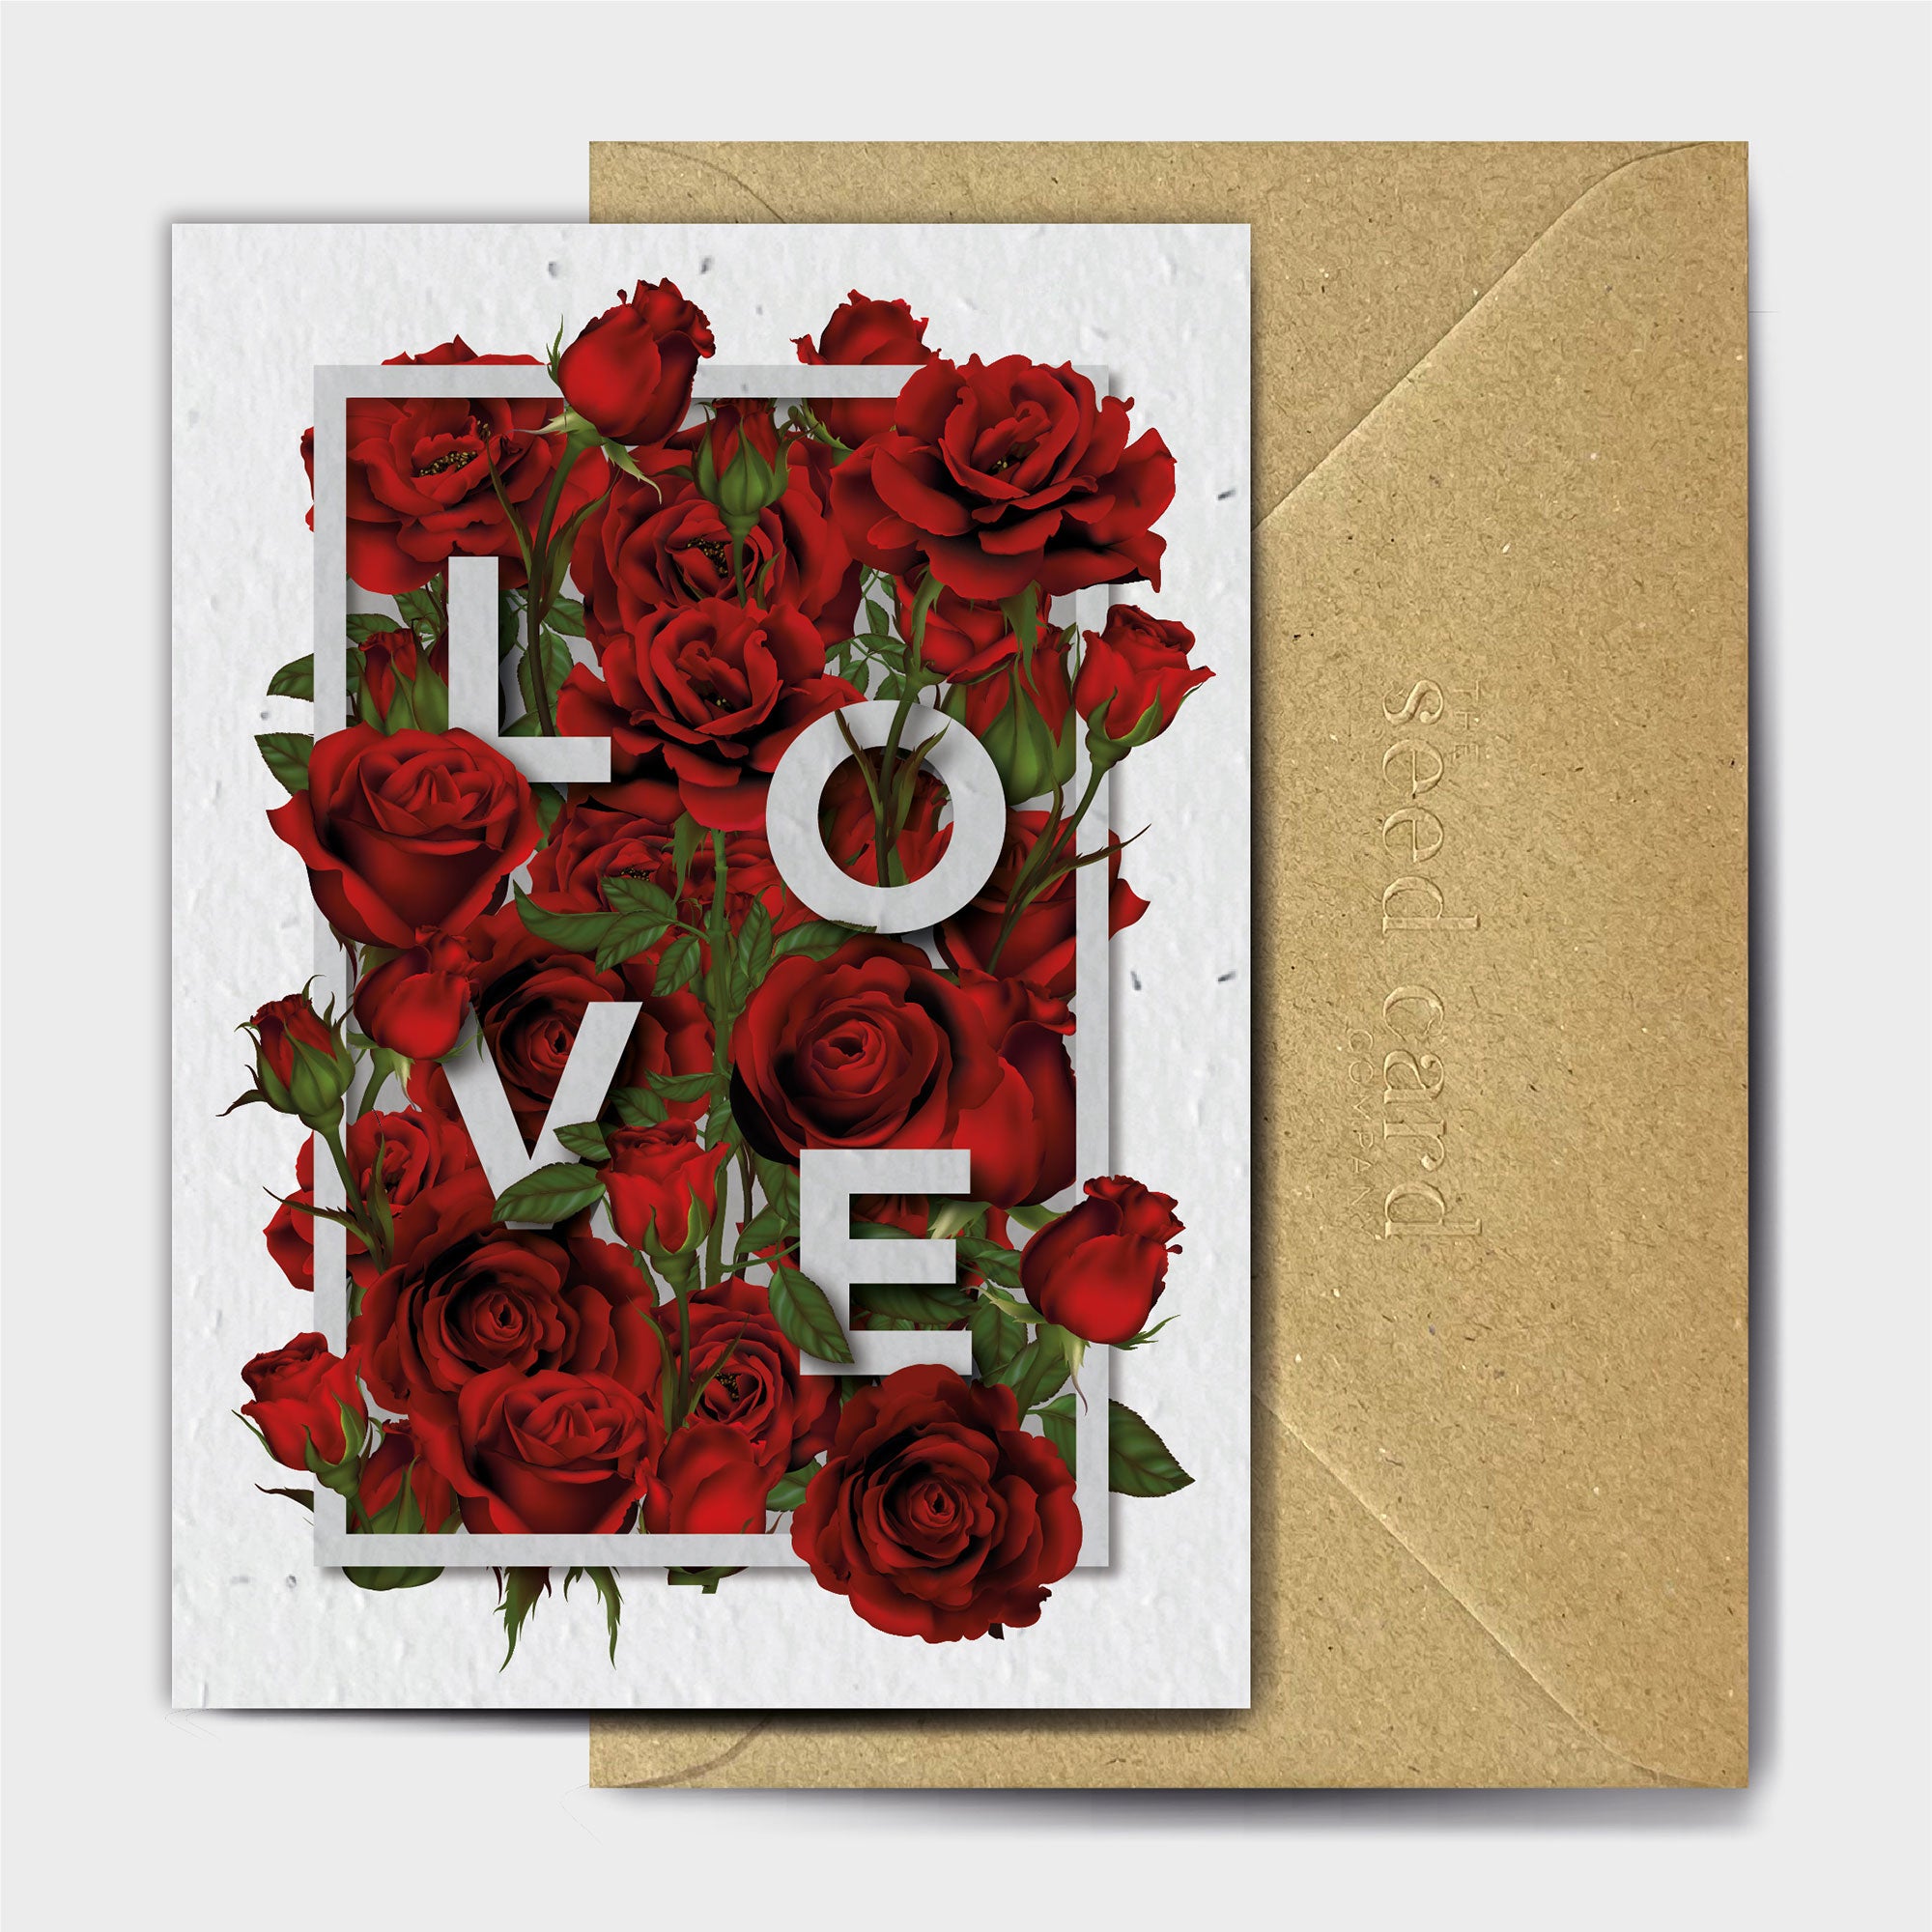 Shop online The Flower of Love - 100% biodegradable seed-embedded cards Shop -The Seed Card Company